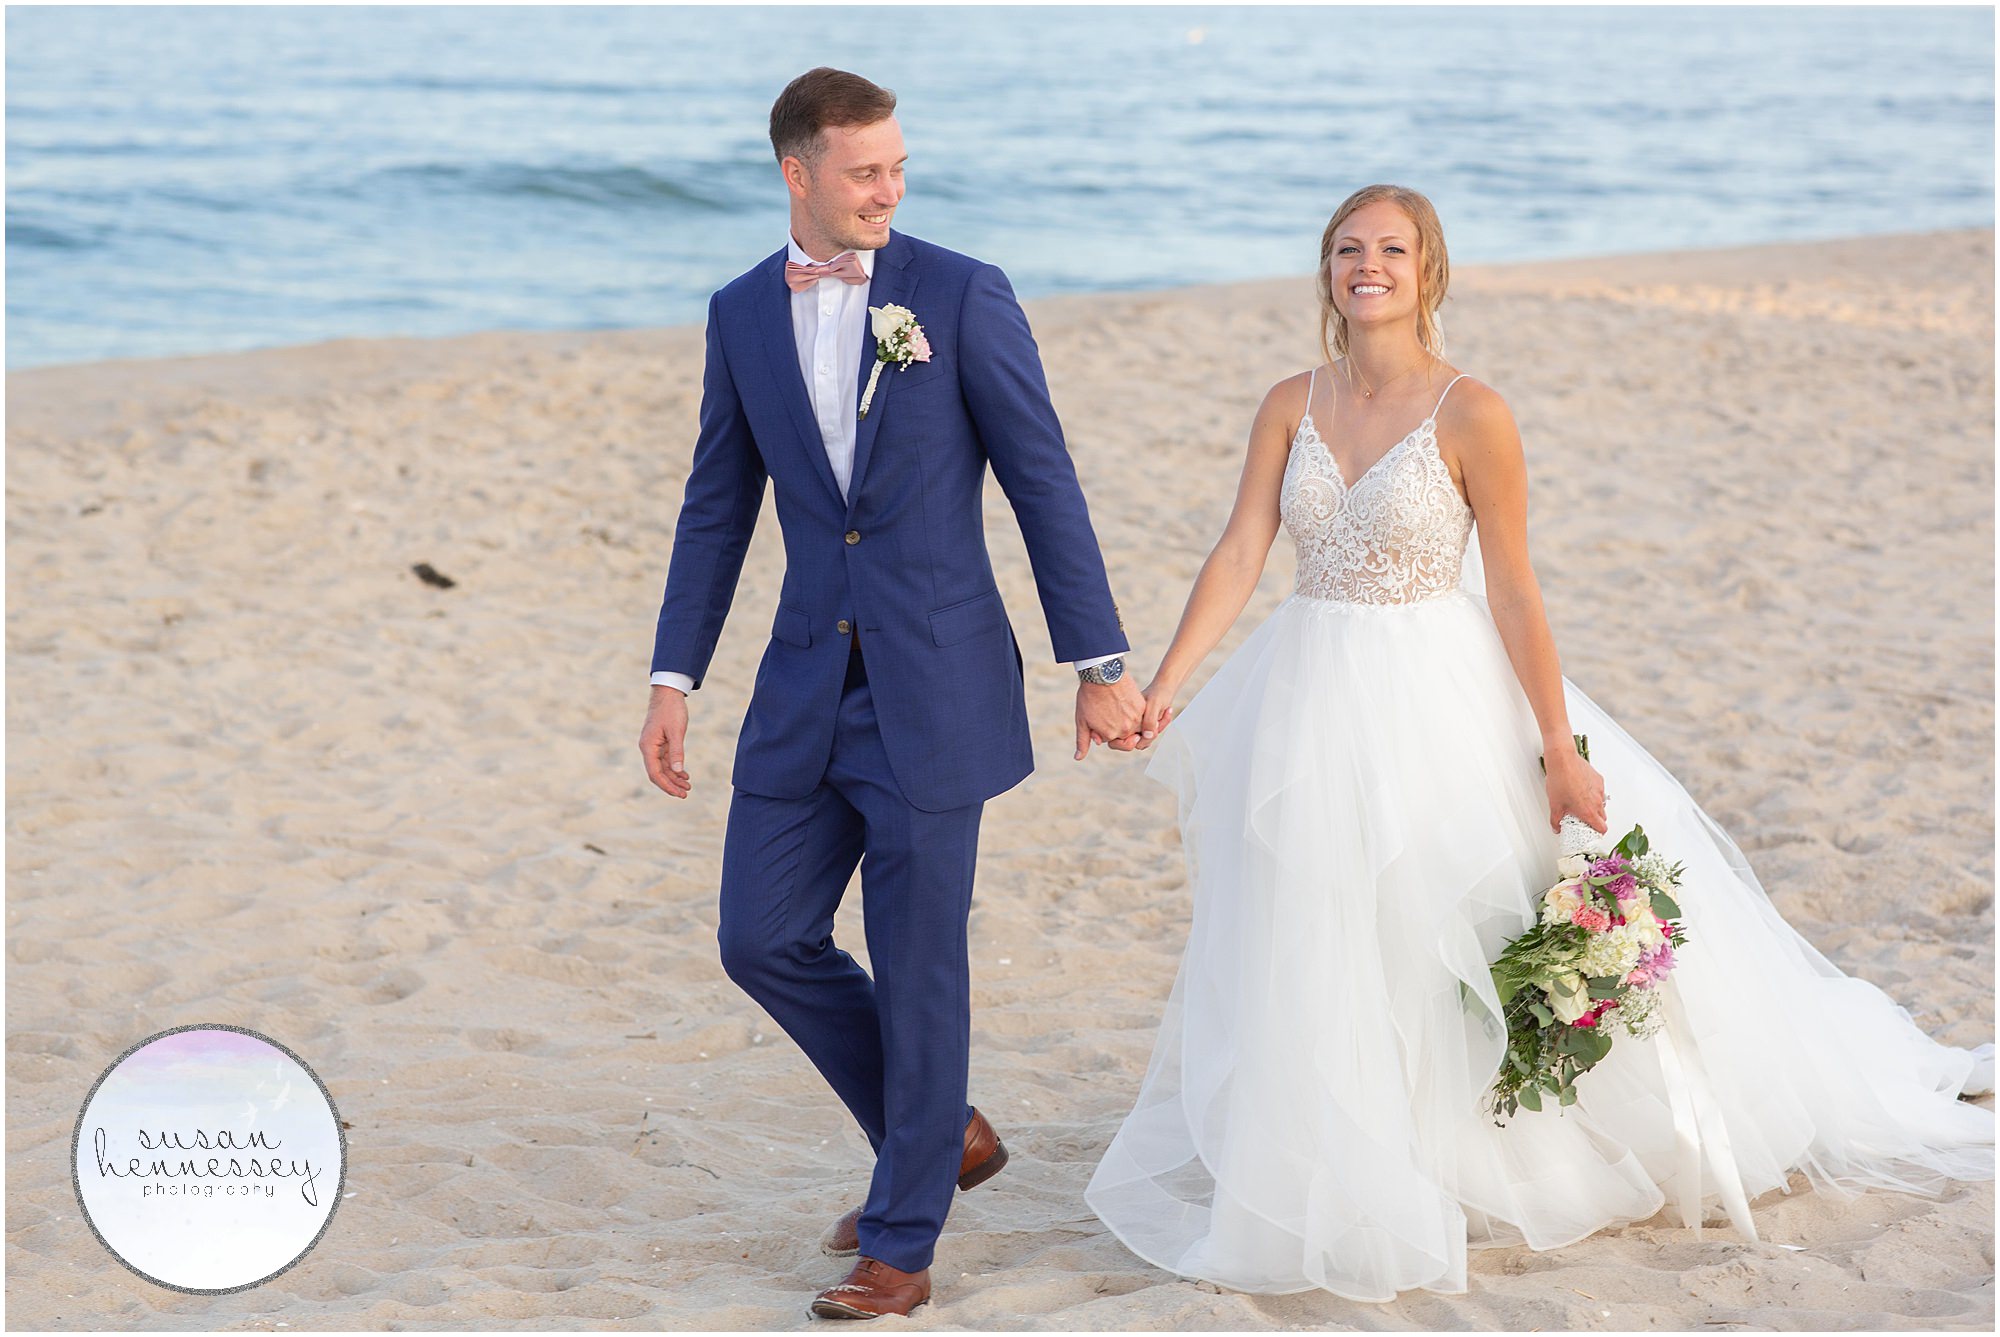 Happy couple on beach for couple portraits at wedding